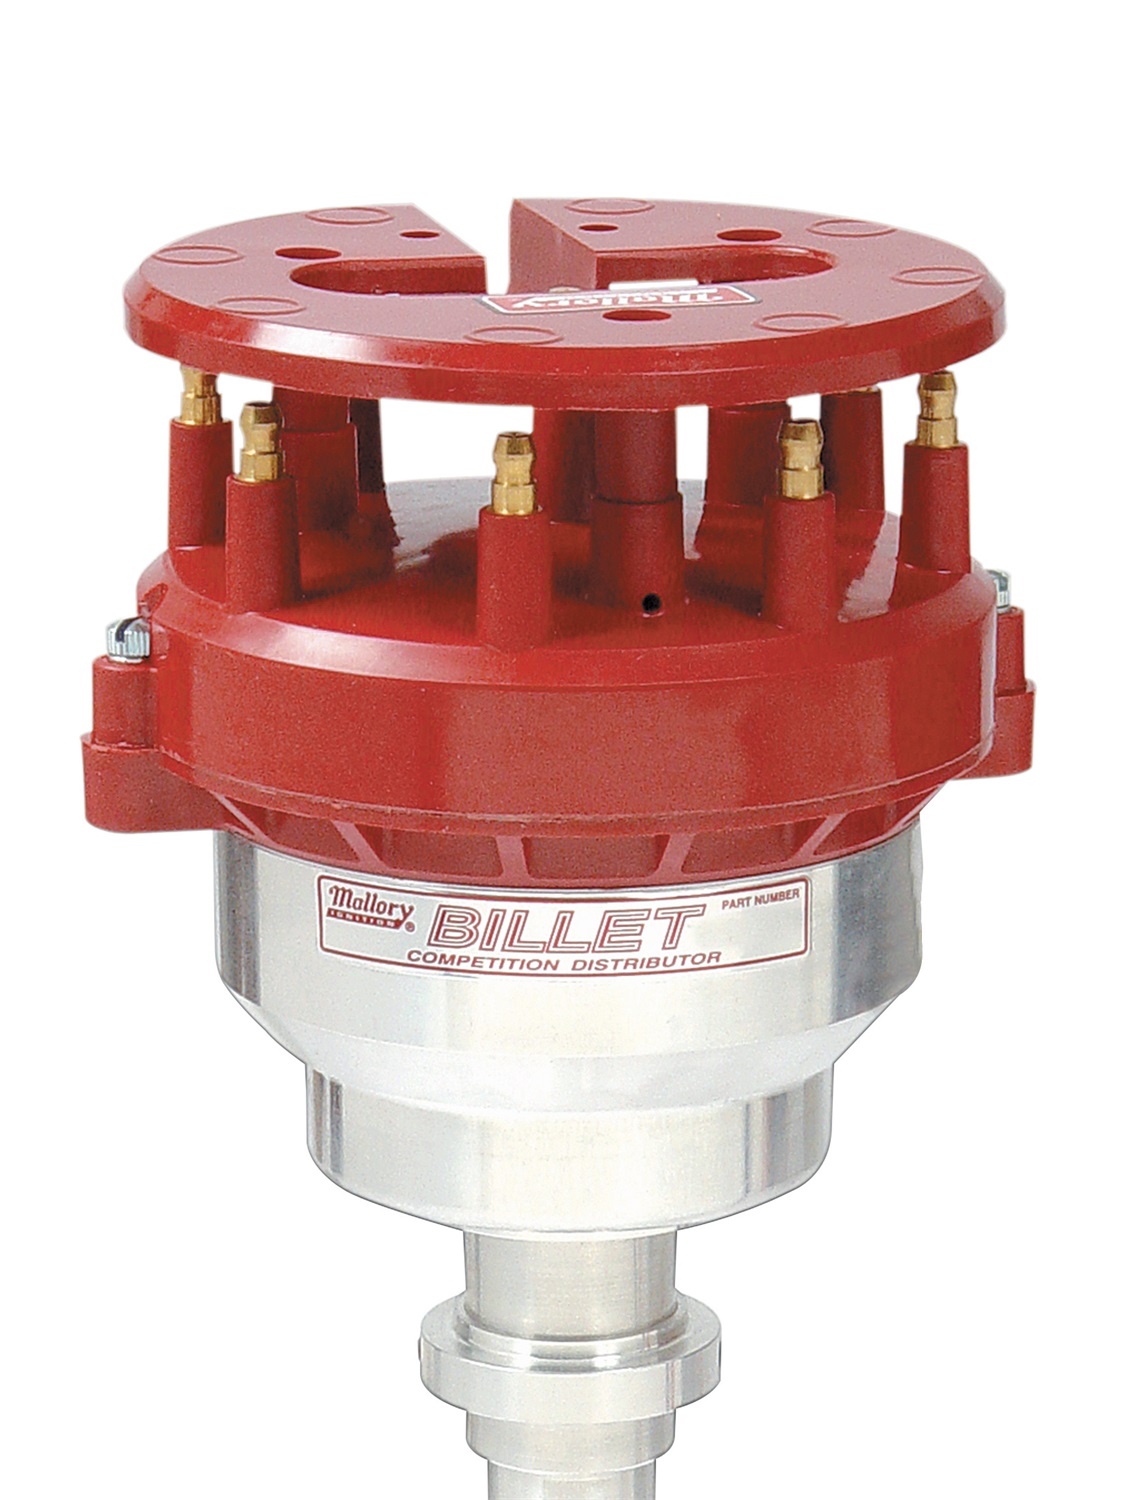 Mallory Mallory 8456715 84 Series; Billet Competition Distributor